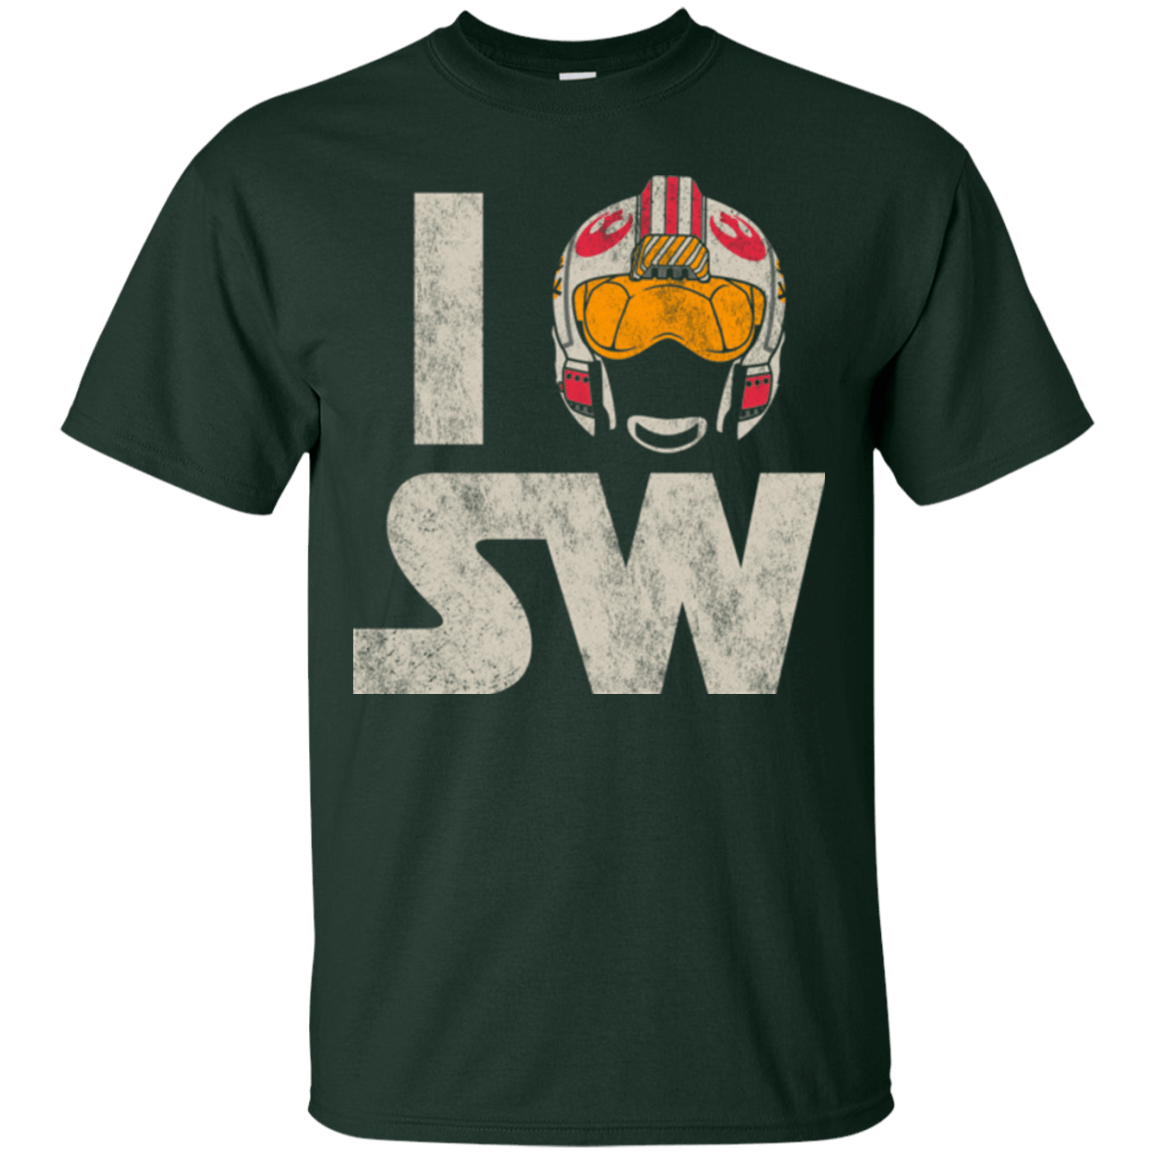 T-Shirts Forest Green / Small I Pilot SW T-Shirt